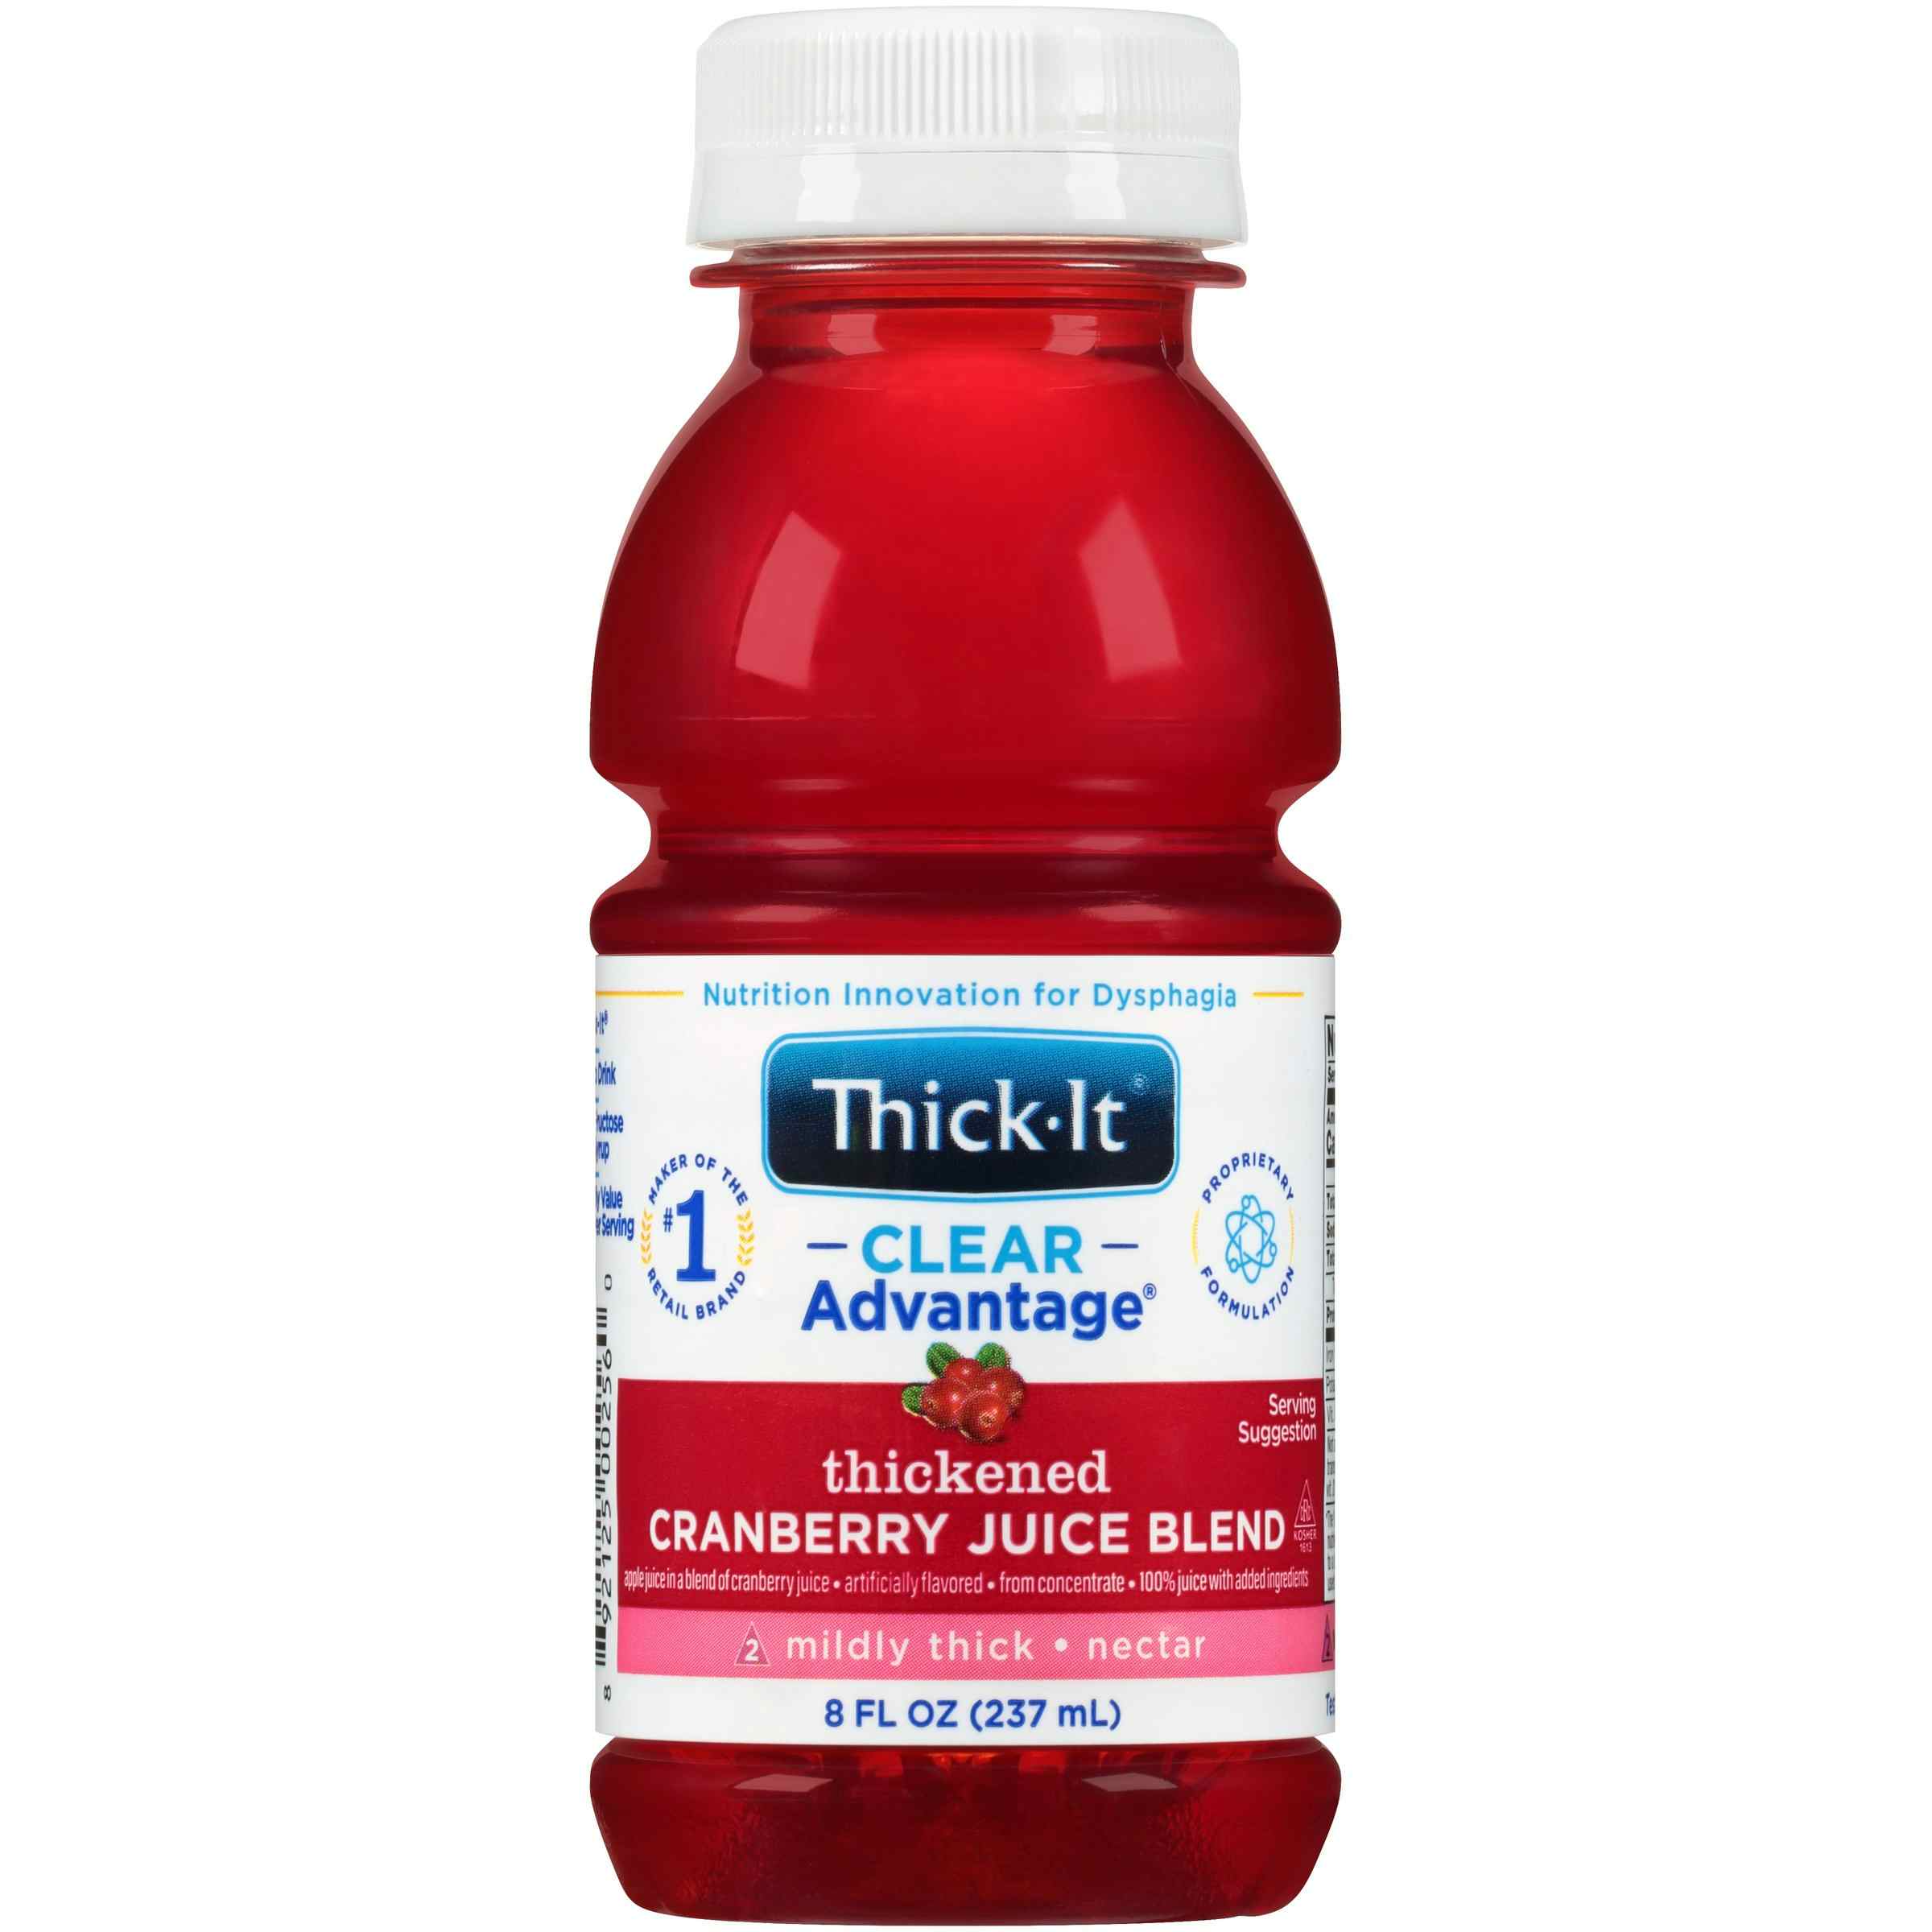 Thick-It Clear Advantage Thickened Cranberry Juice Blend, Mildly Thick, Nectar Consistency